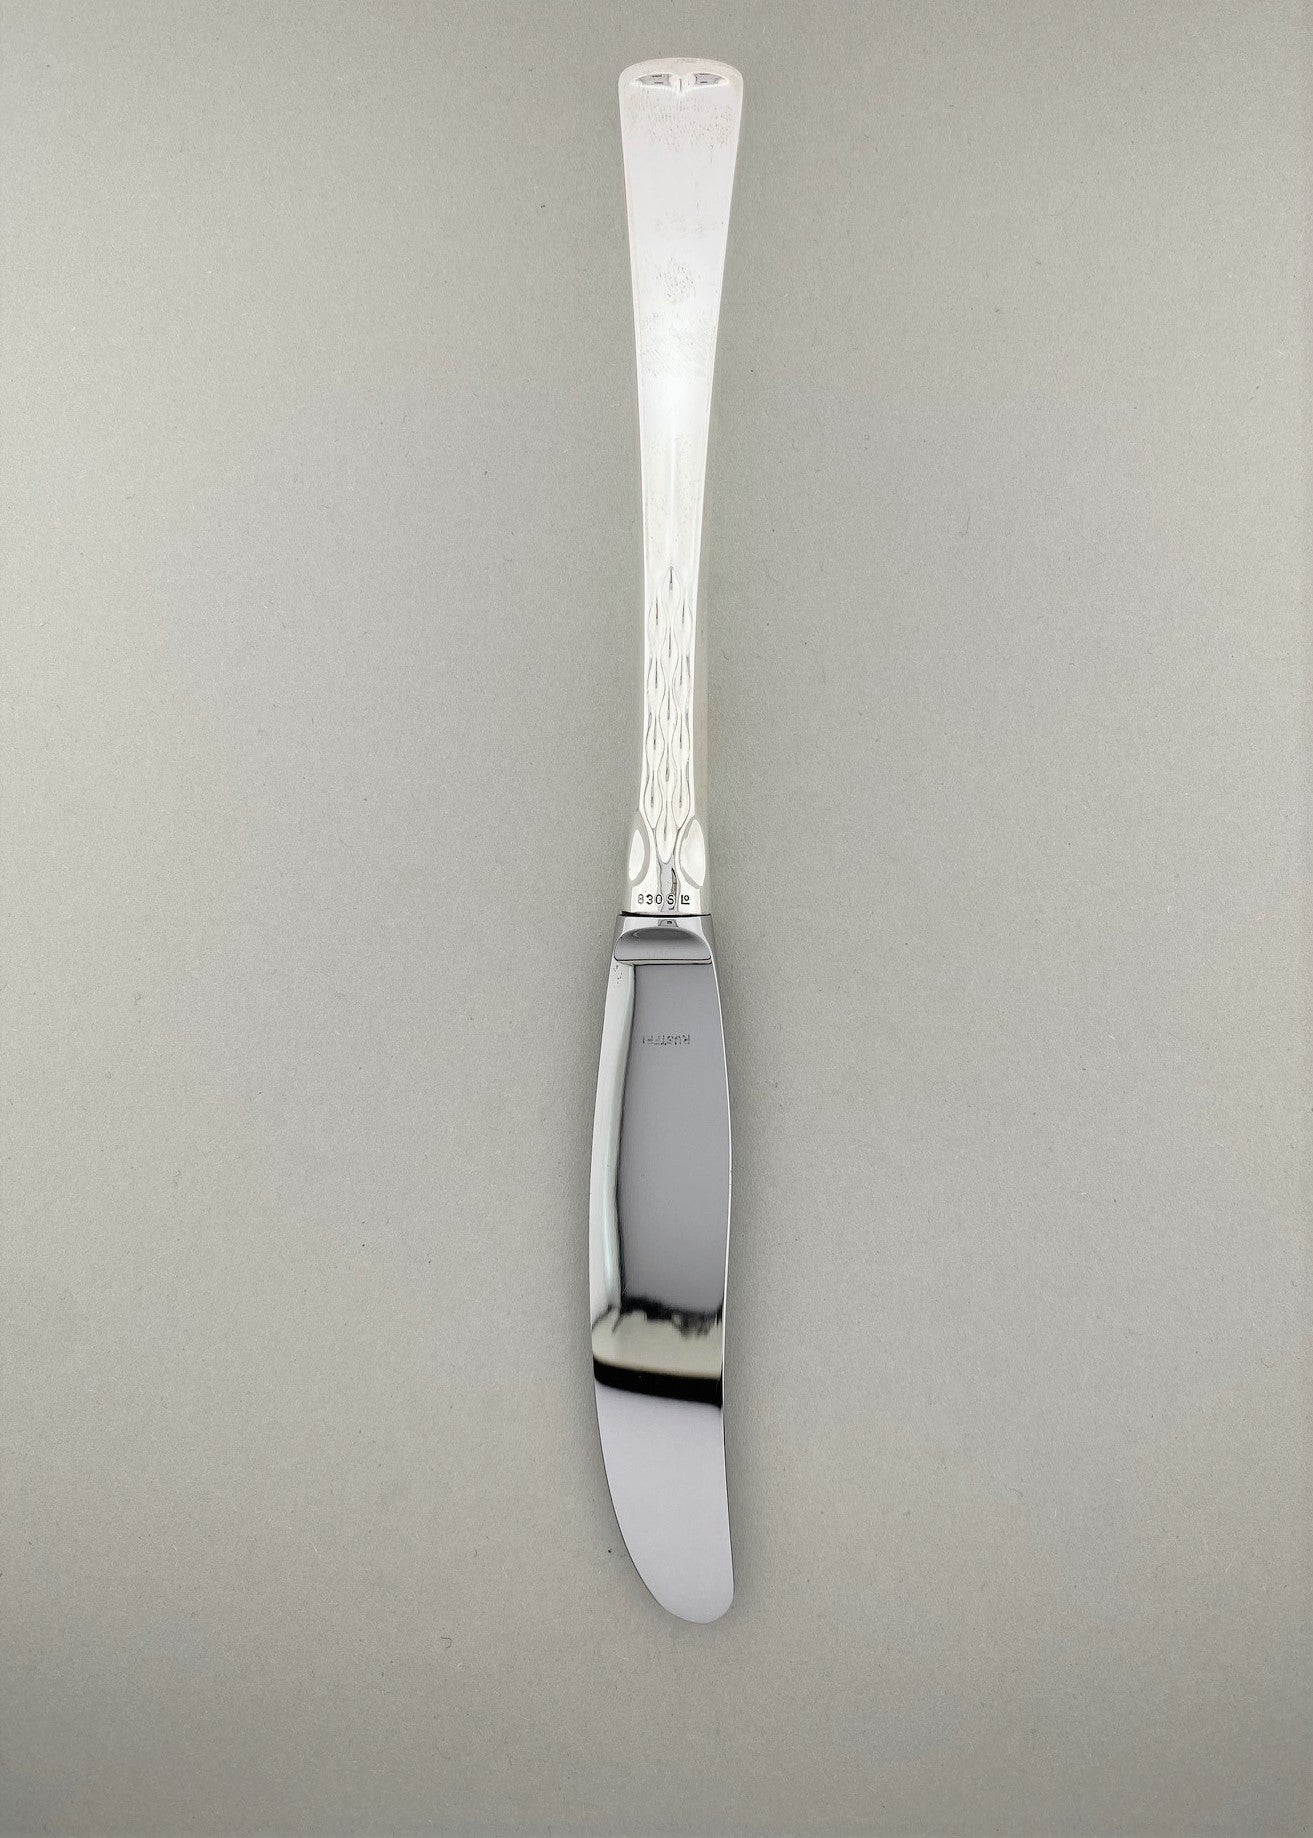 Vintage Silvia small dining knife with long handle